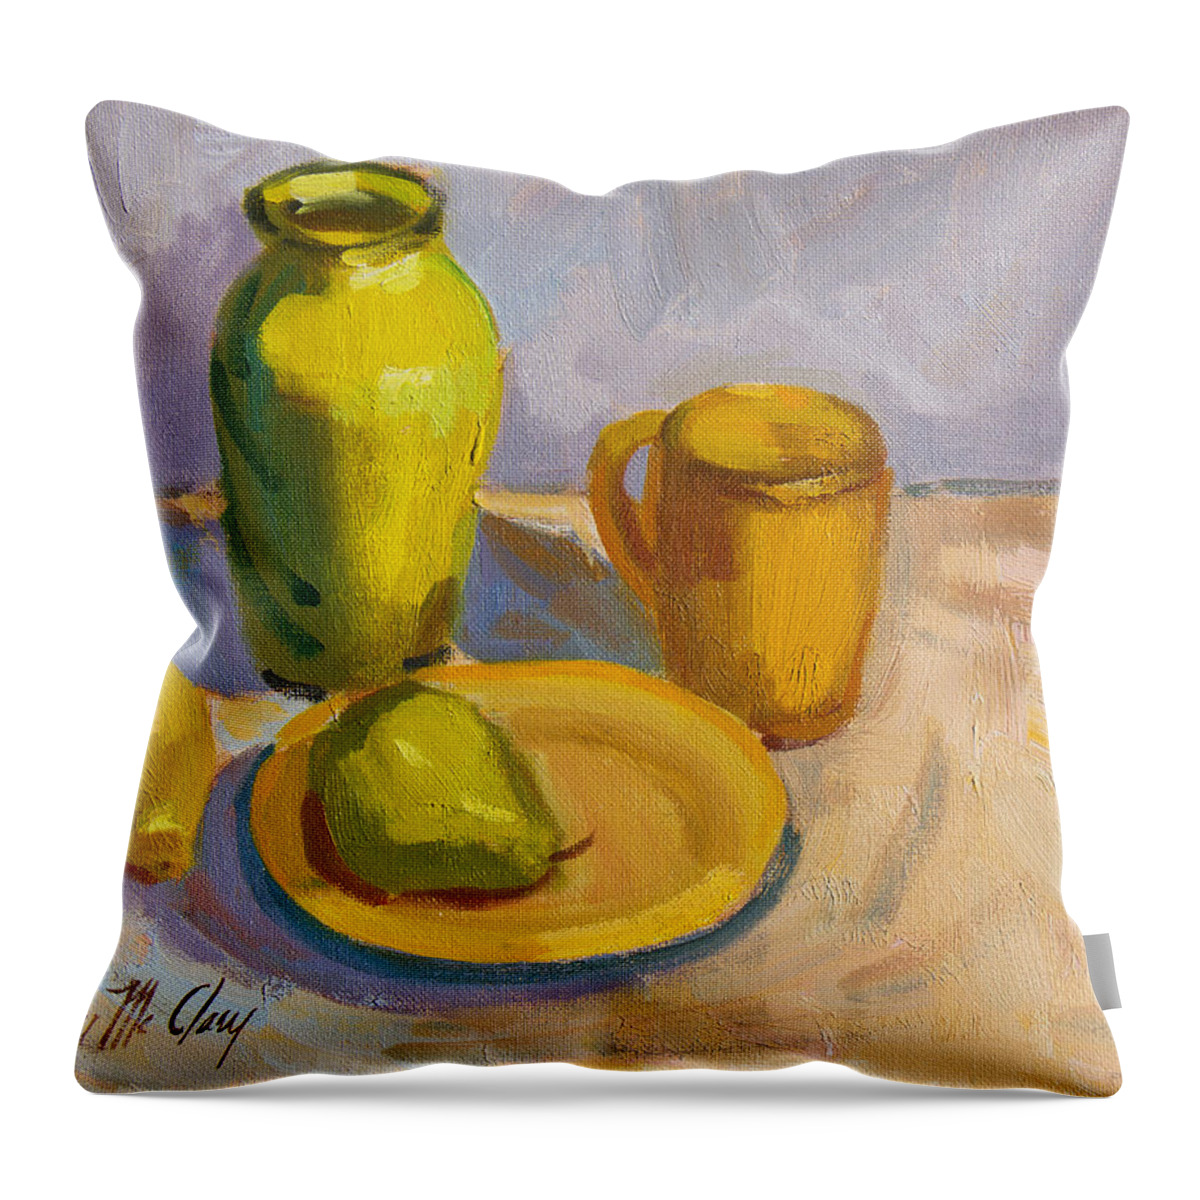 Pitcher Throw Pillow featuring the painting Study in Yellow by Diane McClary